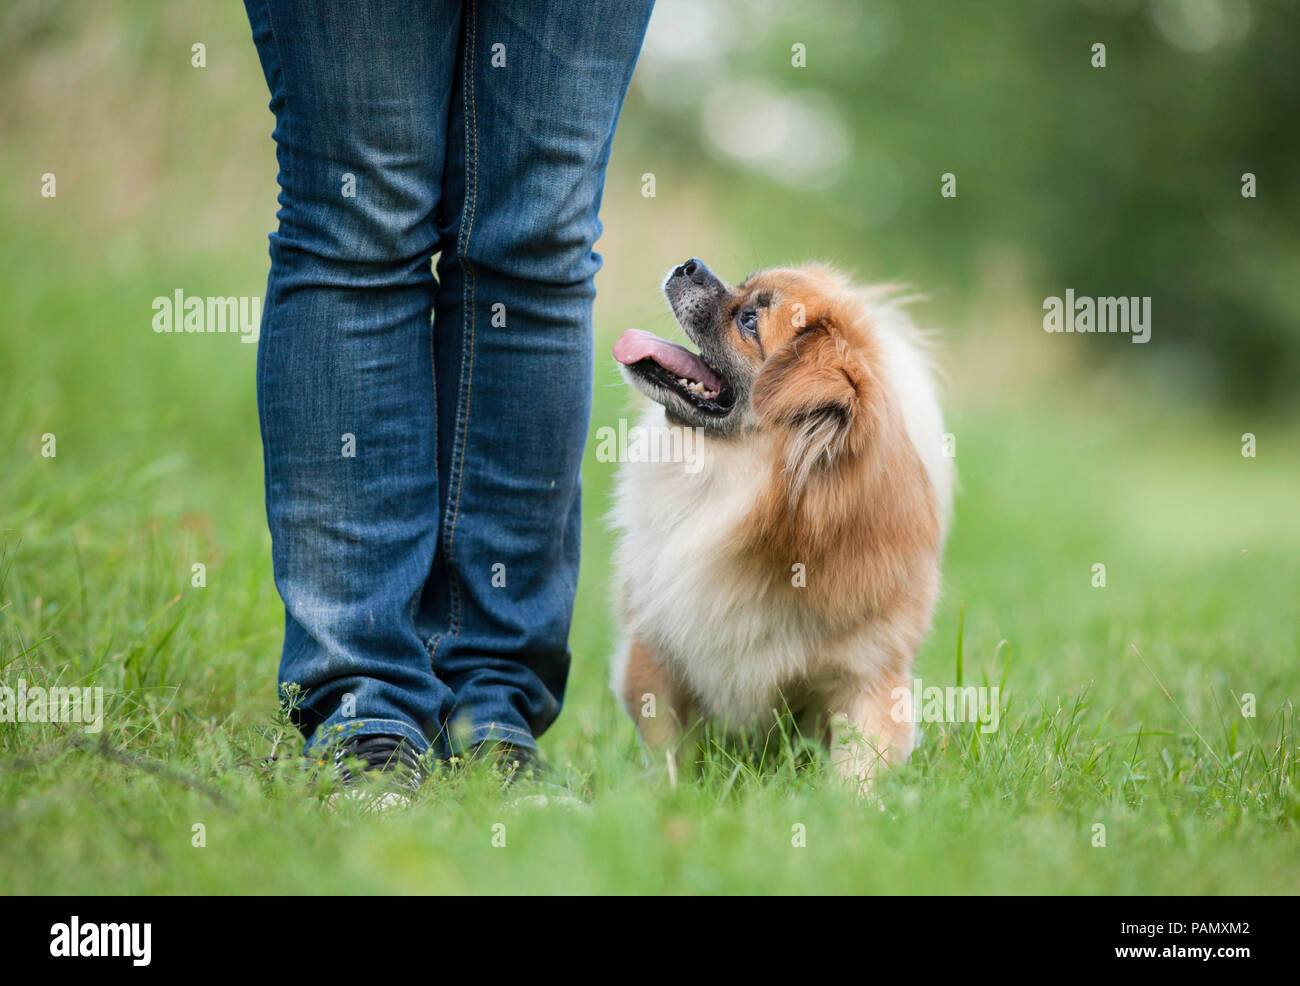 Tibetan Spaniel. Adult dog walking next to a person, looking up. Germany Stock Photo